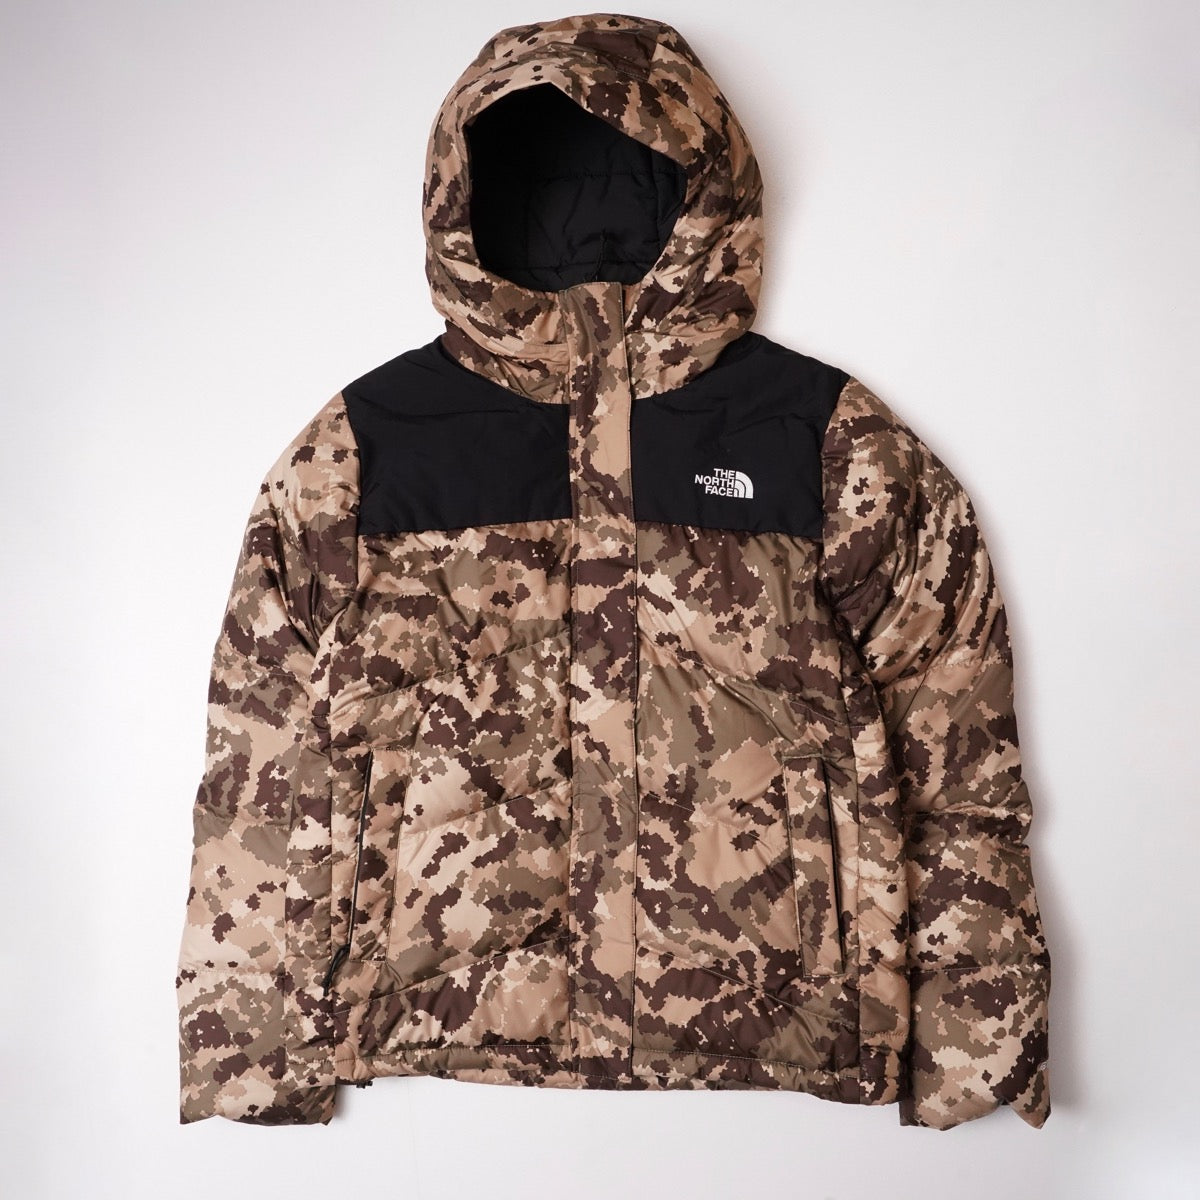 【WOMEN】The North Face Down Jacket